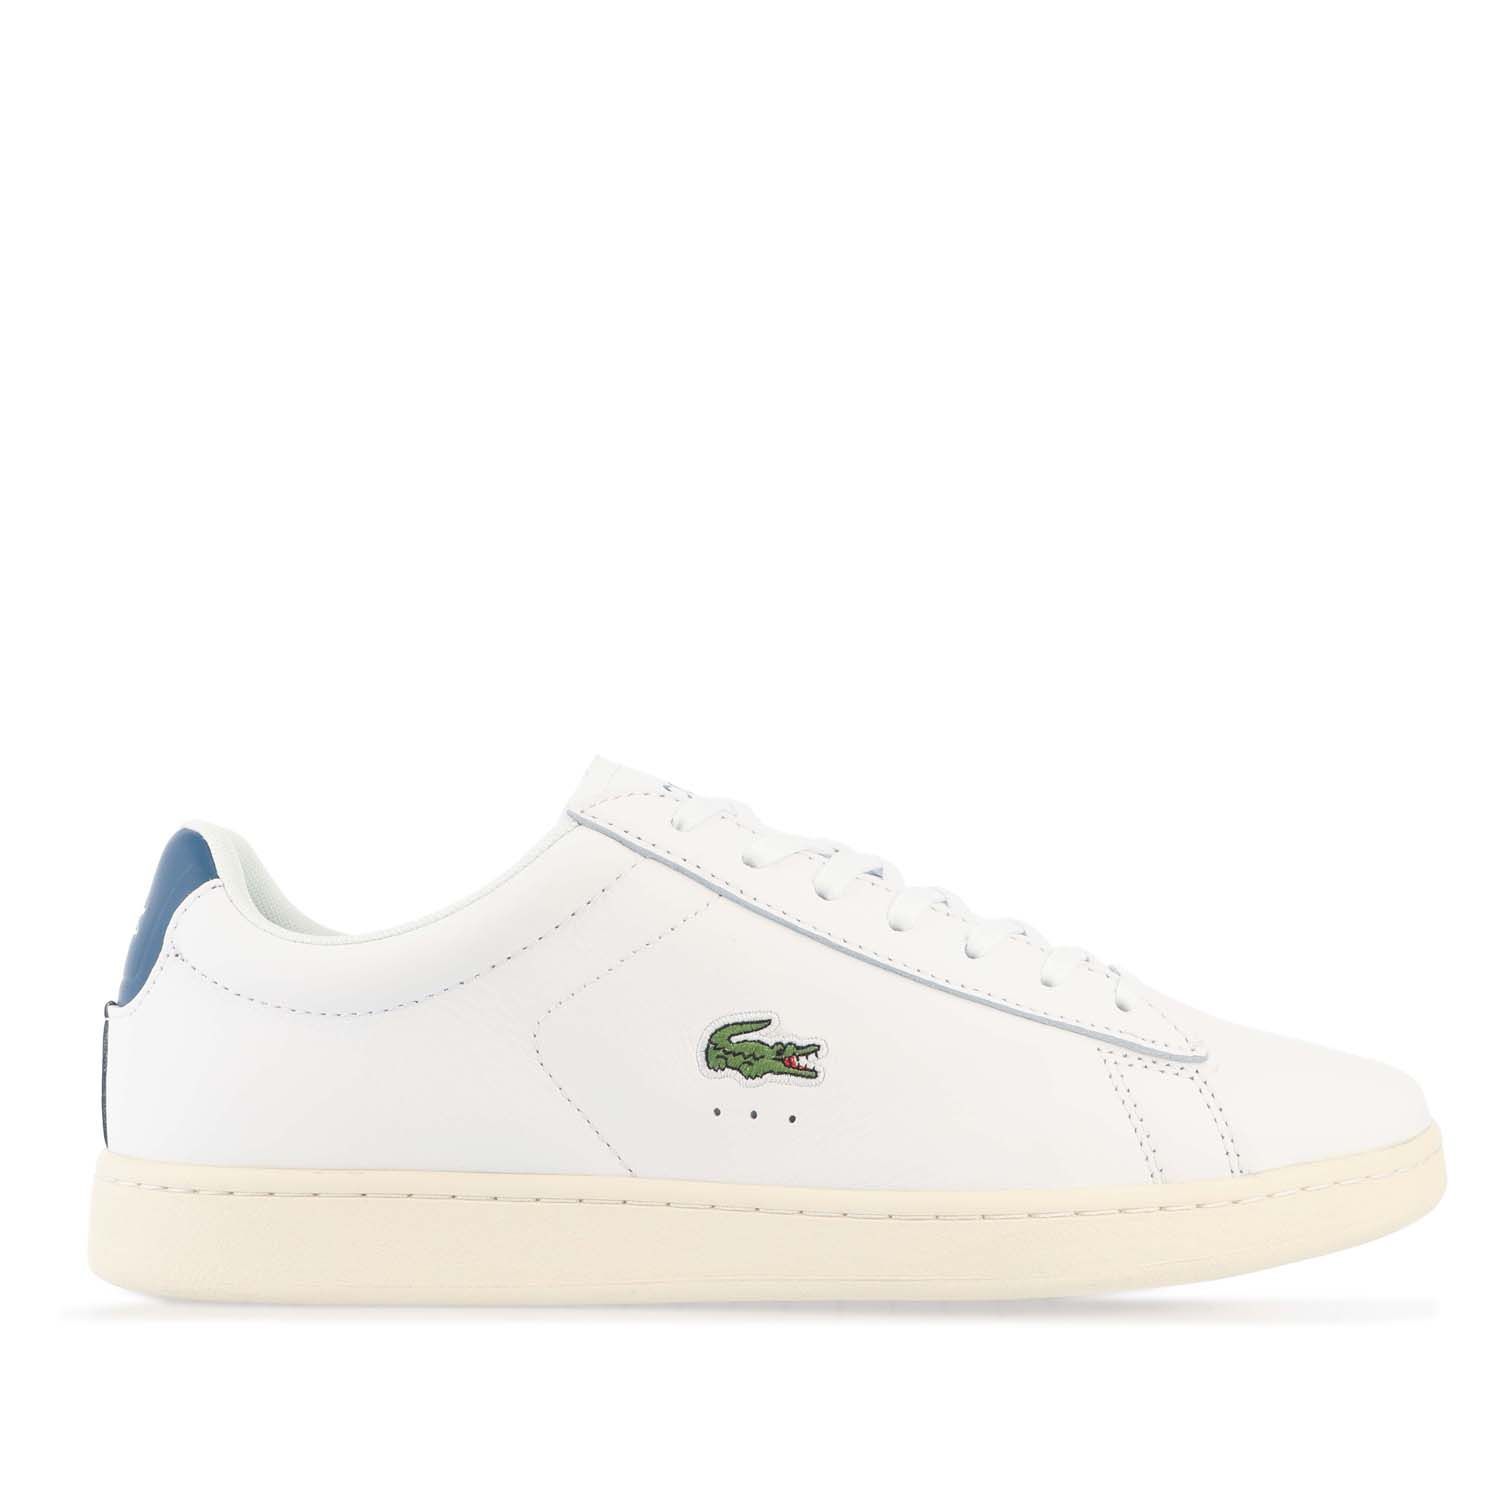 Mens Lacoste Carnaby Leather Accent Heel Trainers in white - dark blue.- Premium leather upper.- Lace up fastening with comfortable flat laces.- Padded collar and tongue.- Piqué-inspired mesh lining.- Removable Ortholite sockliner for comfort and odour control.- Rubber cupsole with stitching.- Lacoste lettered branding at tongue.- Contrast heel patch with printed crocodile.- Embroidered crocodile to side.- Leather upper  Textile lining  Synthetic sole.- Ref: 7-43SMA0017X96